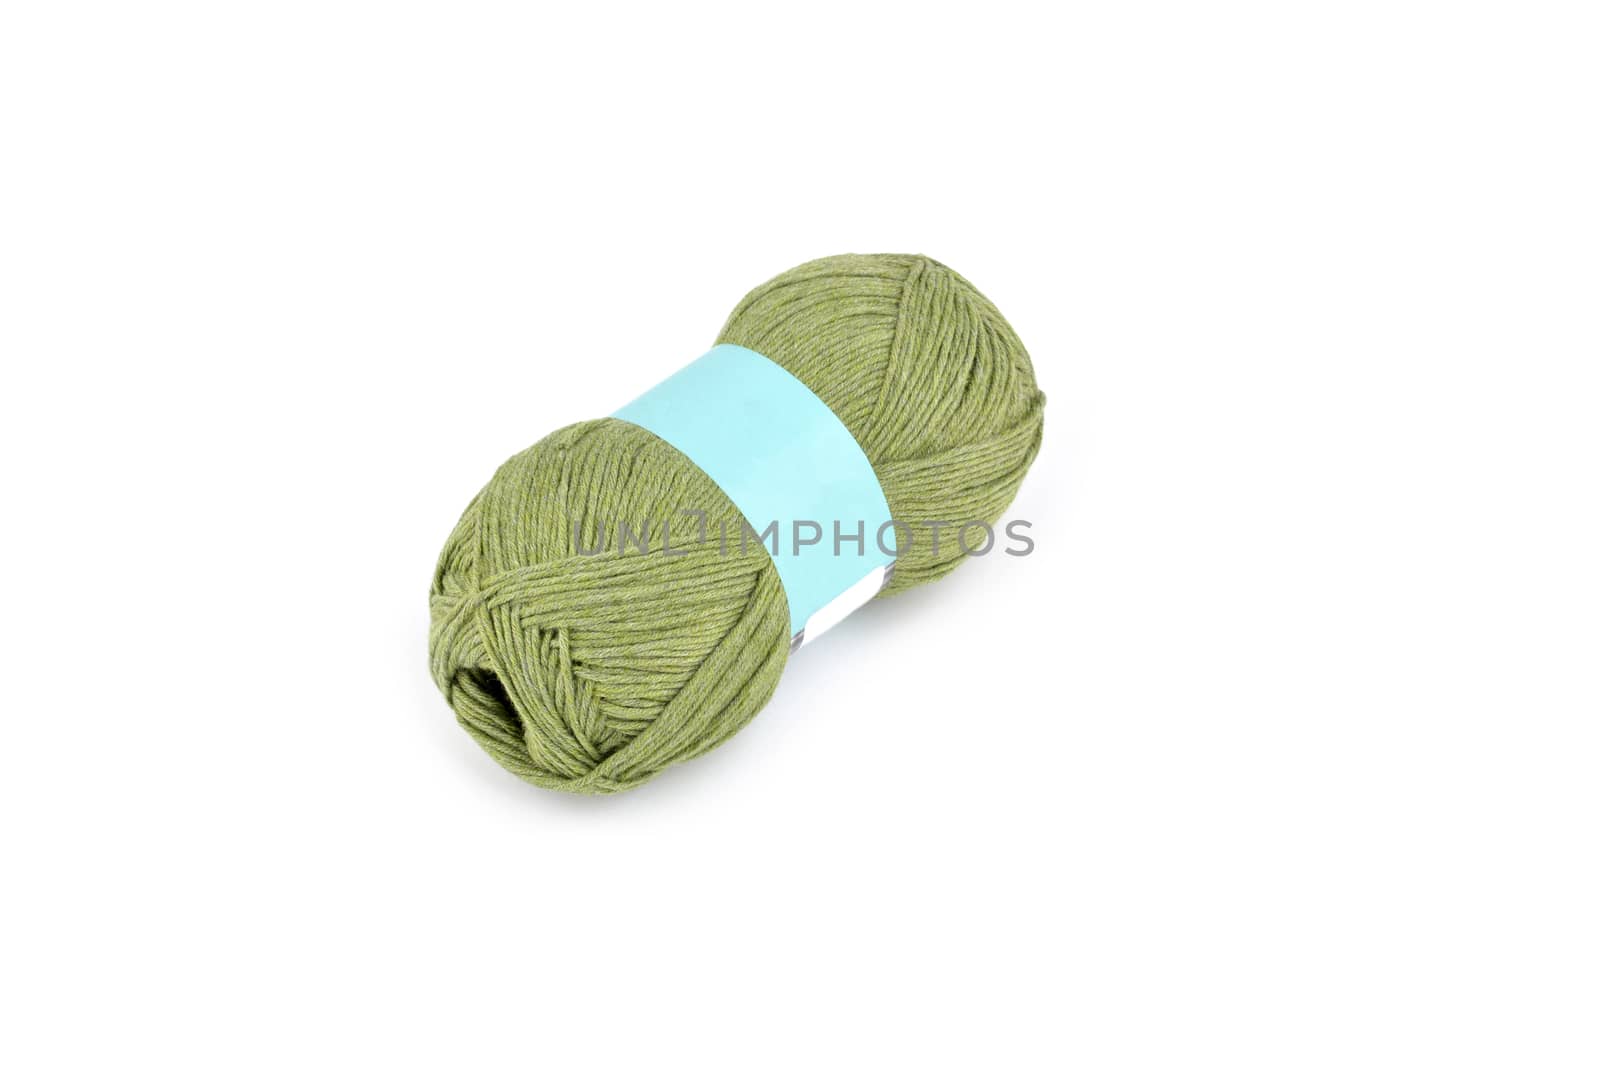 Tangle of color yarn with blank label on white background skein. Knitting isolated on white. Use for store